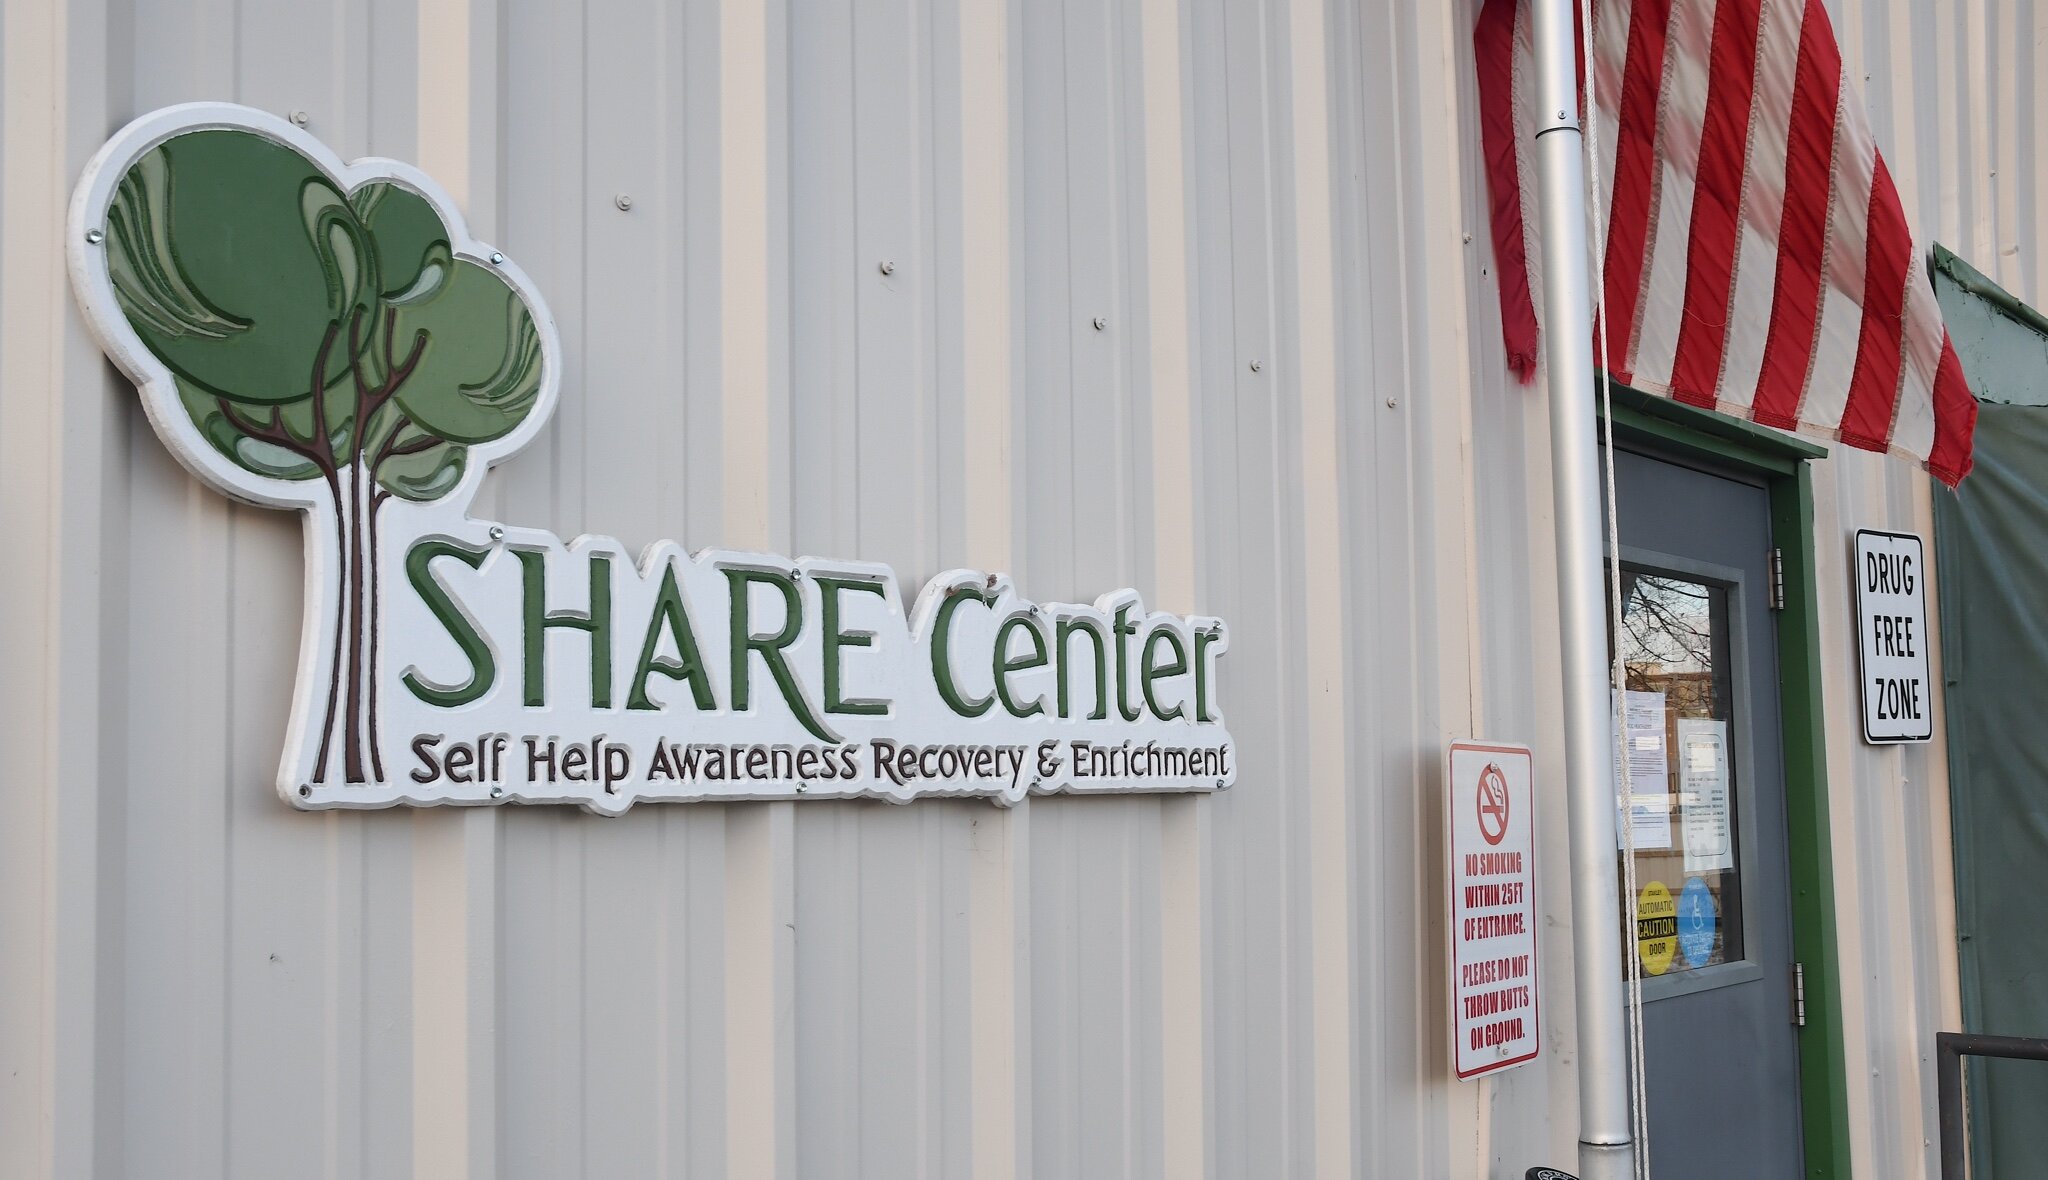 The SHARE Center provides services unavailable anywhere else in Battle Creek to people who are unhoused.